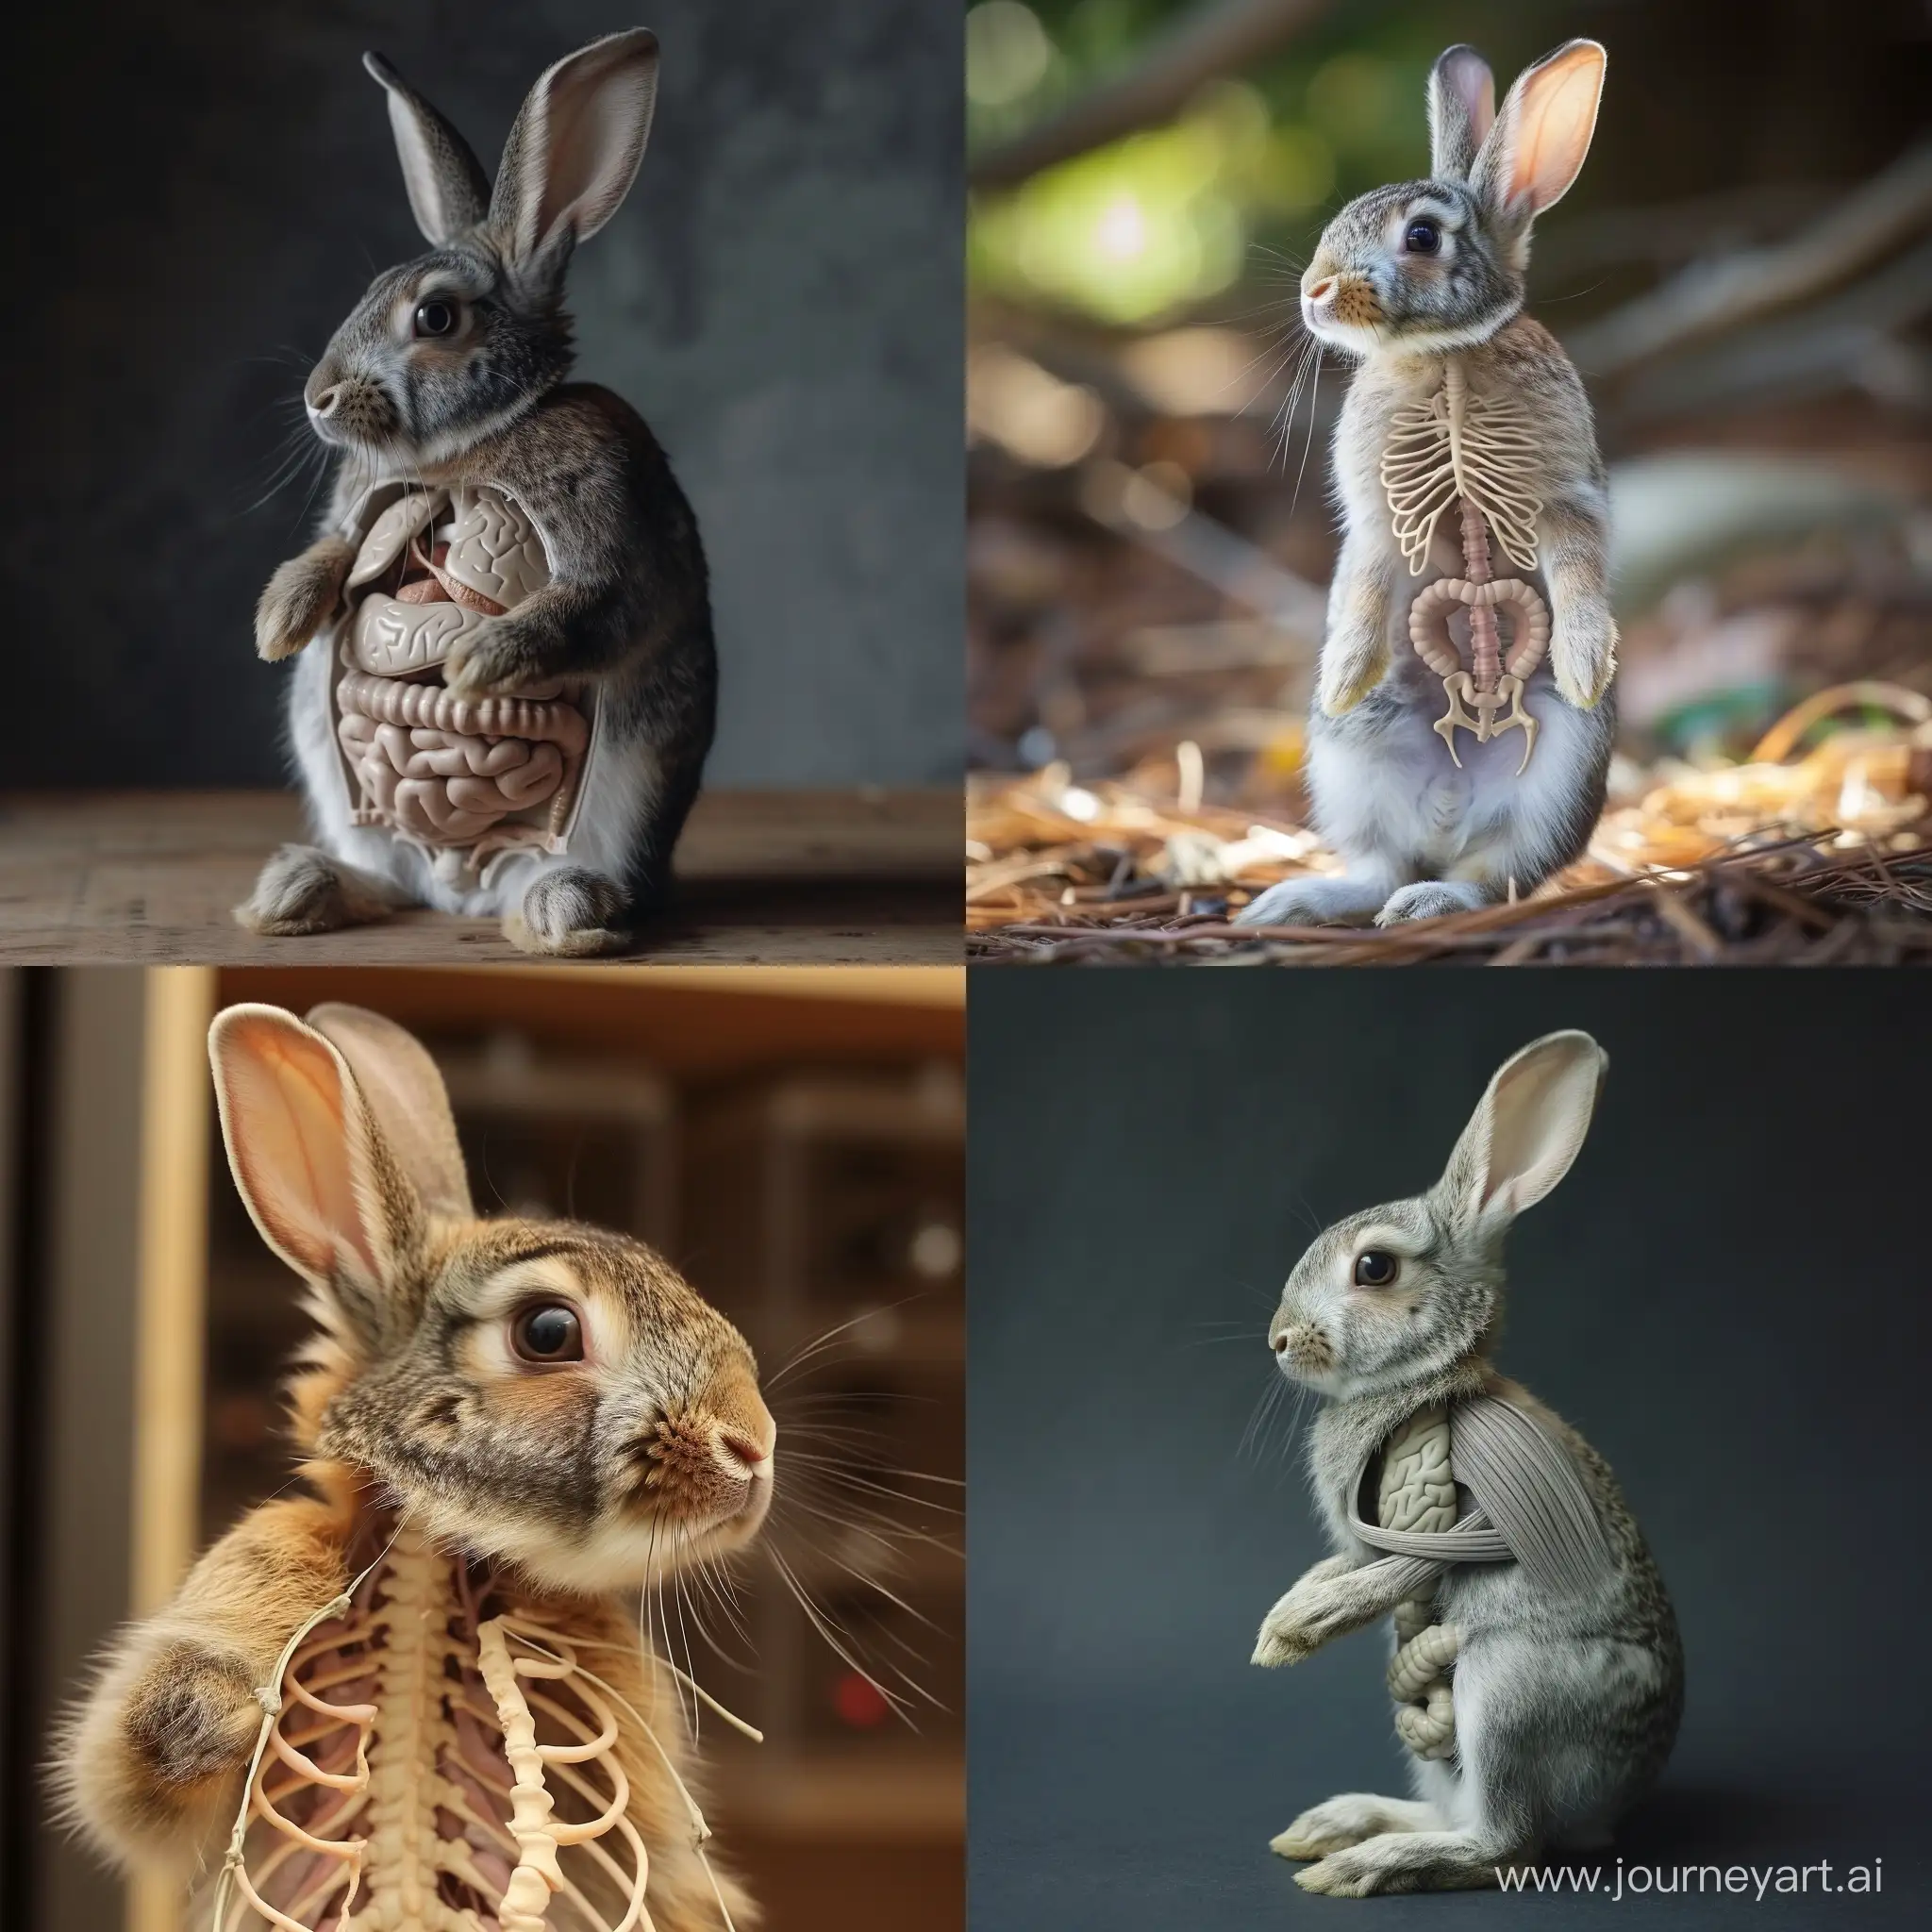 A rabbit that produces a body like a human body